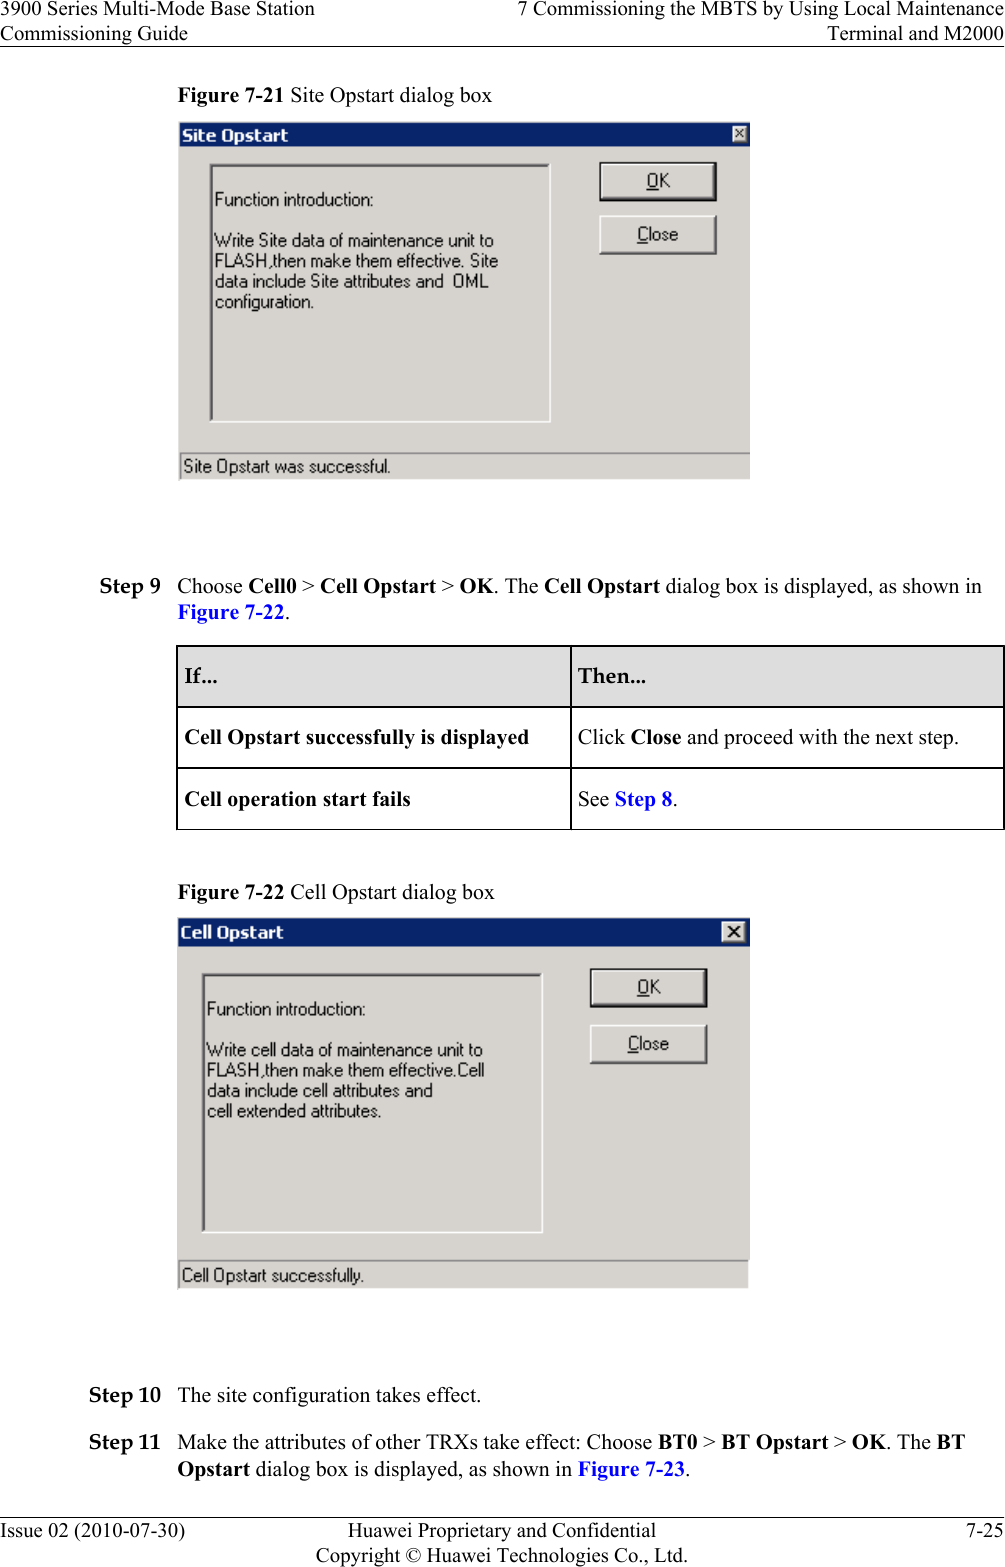 Figure 7-21 Site Opstart dialog box Step 9 Choose Cell0 &gt; Cell Opstart &gt; OK. The Cell Opstart dialog box is displayed, as shown inFigure 7-22.If... Then...Cell Opstart successfully is displayed Click Close and proceed with the next step.Cell operation start fails See Step 8.Figure 7-22 Cell Opstart dialog box Step 10 The site configuration takes effect.Step 11 Make the attributes of other TRXs take effect: Choose BT0 &gt; BT Opstart &gt; OK. The BTOpstart dialog box is displayed, as shown in Figure 7-23.3900 Series Multi-Mode Base StationCommissioning Guide7 Commissioning the MBTS by Using Local MaintenanceTerminal and M2000Issue 02 (2010-07-30) Huawei Proprietary and ConfidentialCopyright © Huawei Technologies Co., Ltd.7-25